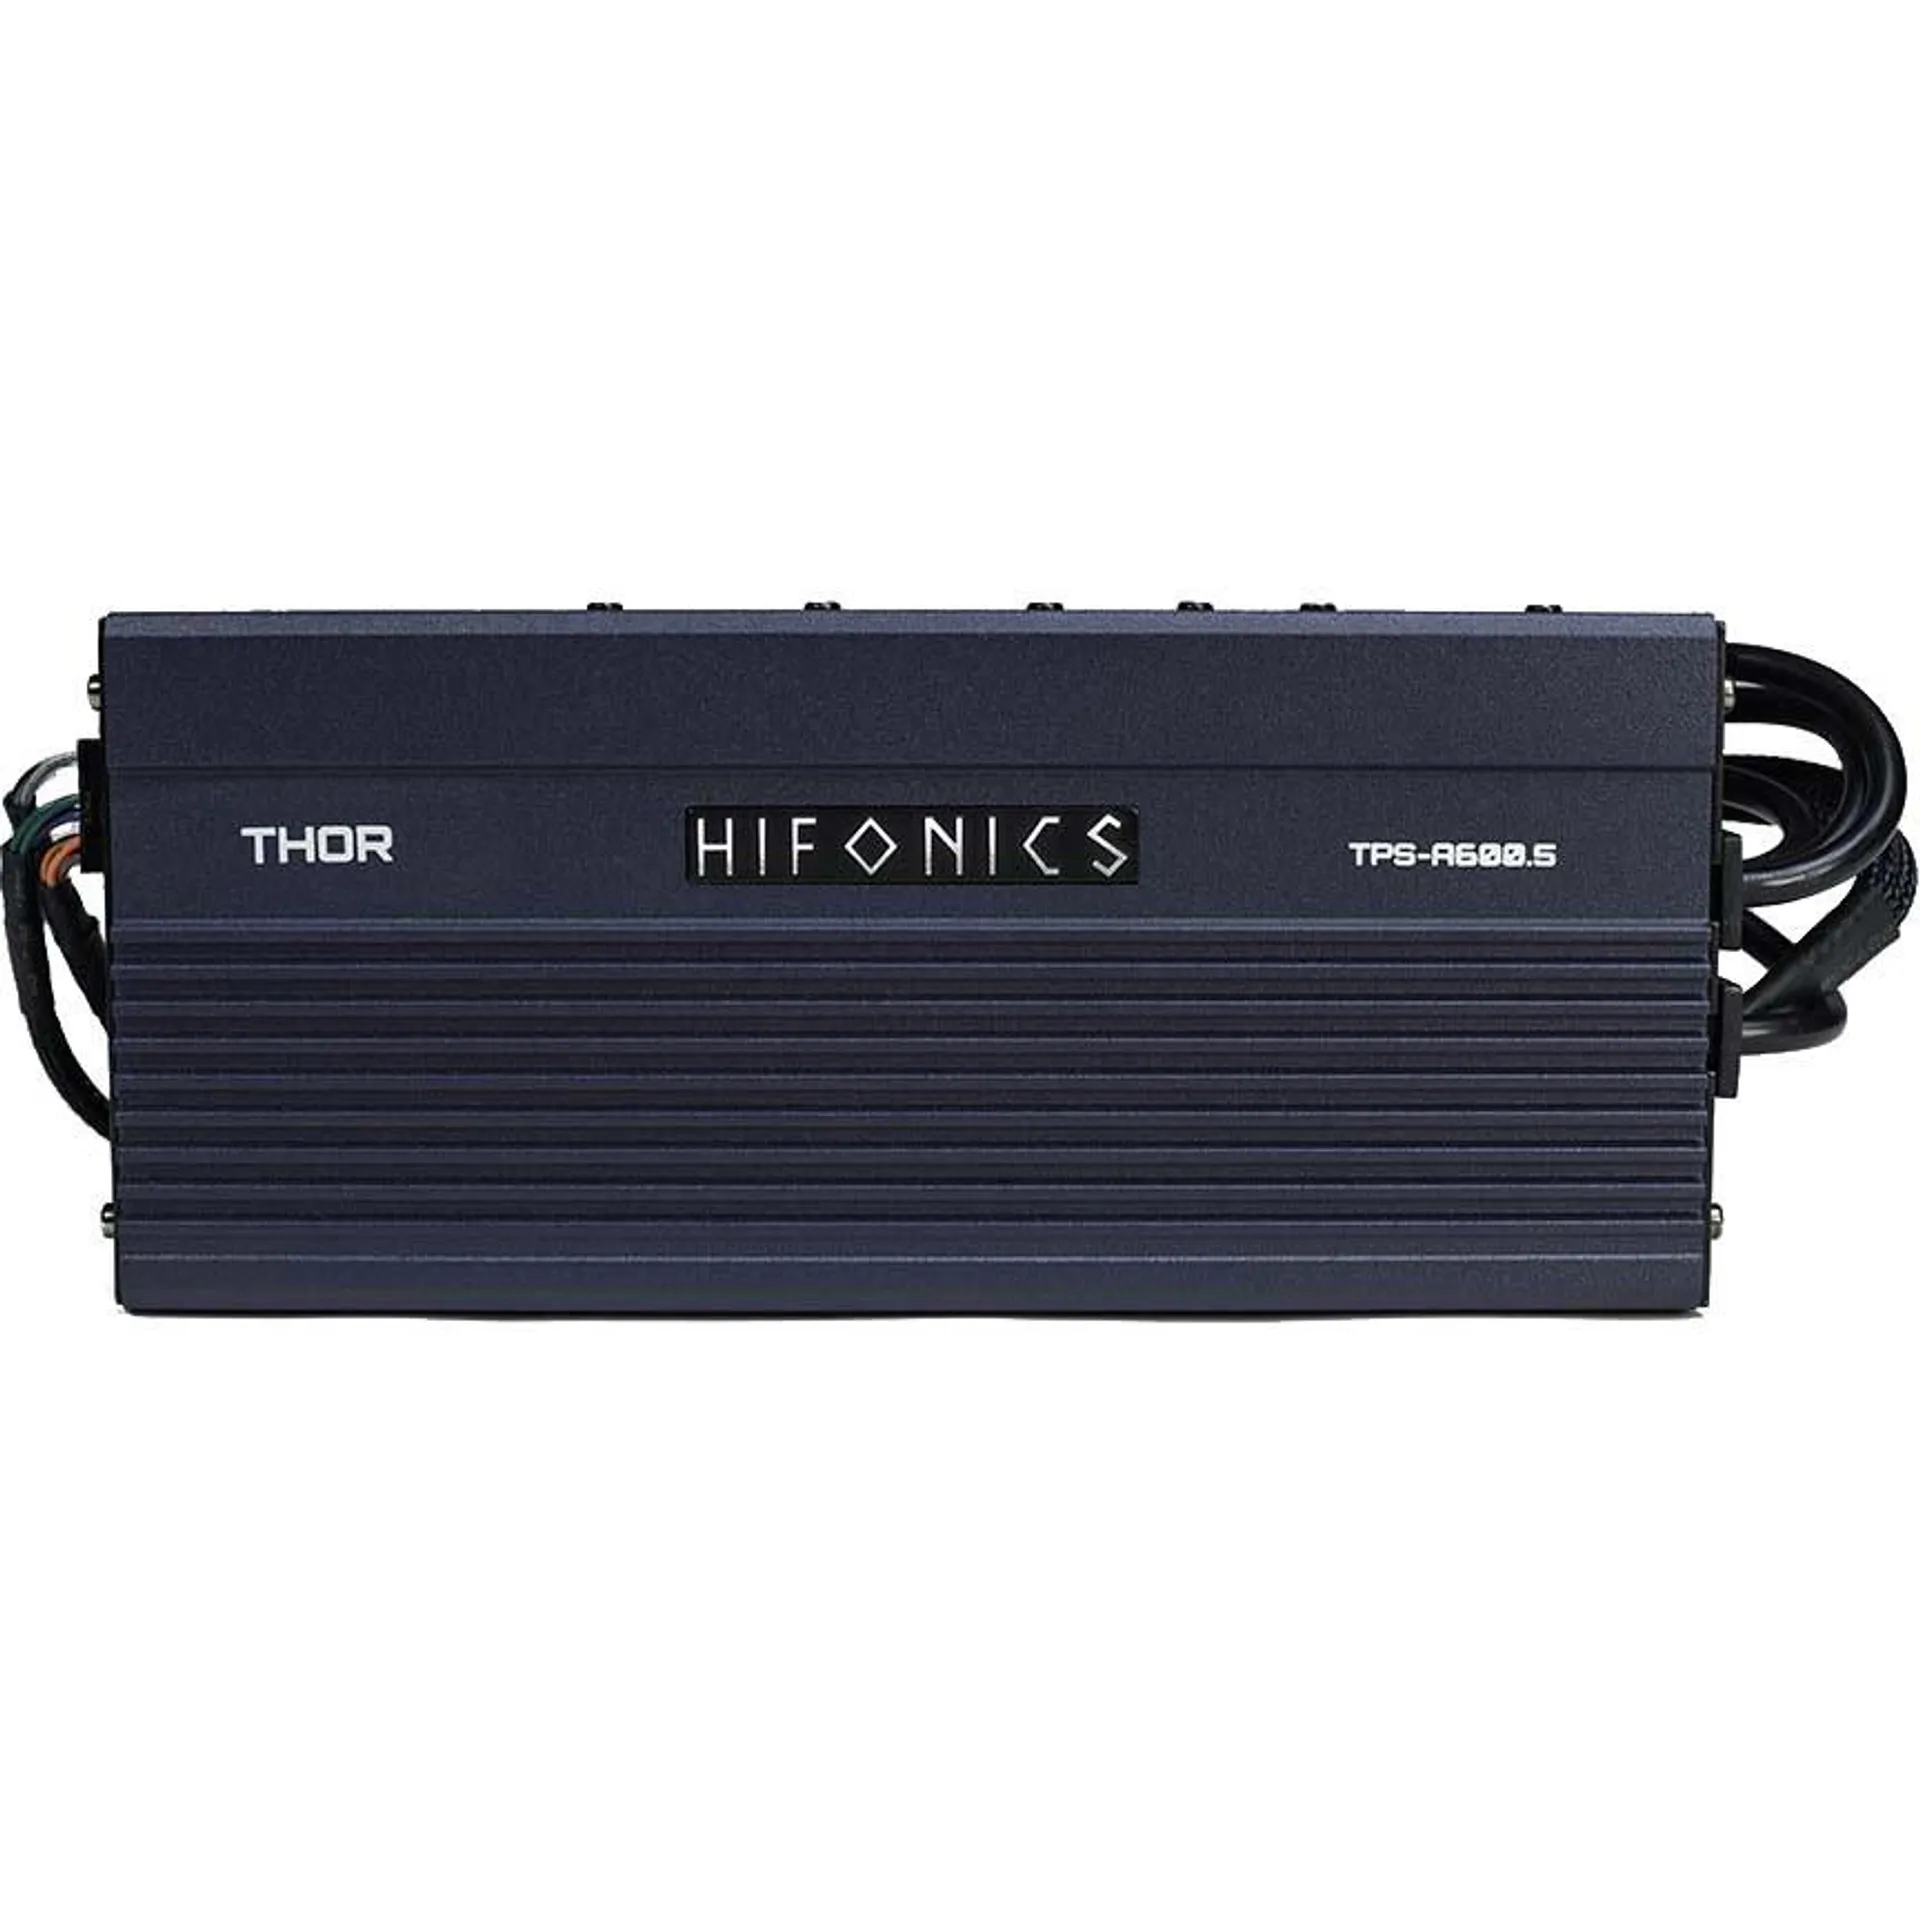 The Wholesale House, Inc Hifonics Thor Compact 5 Channel Digital Amplfier